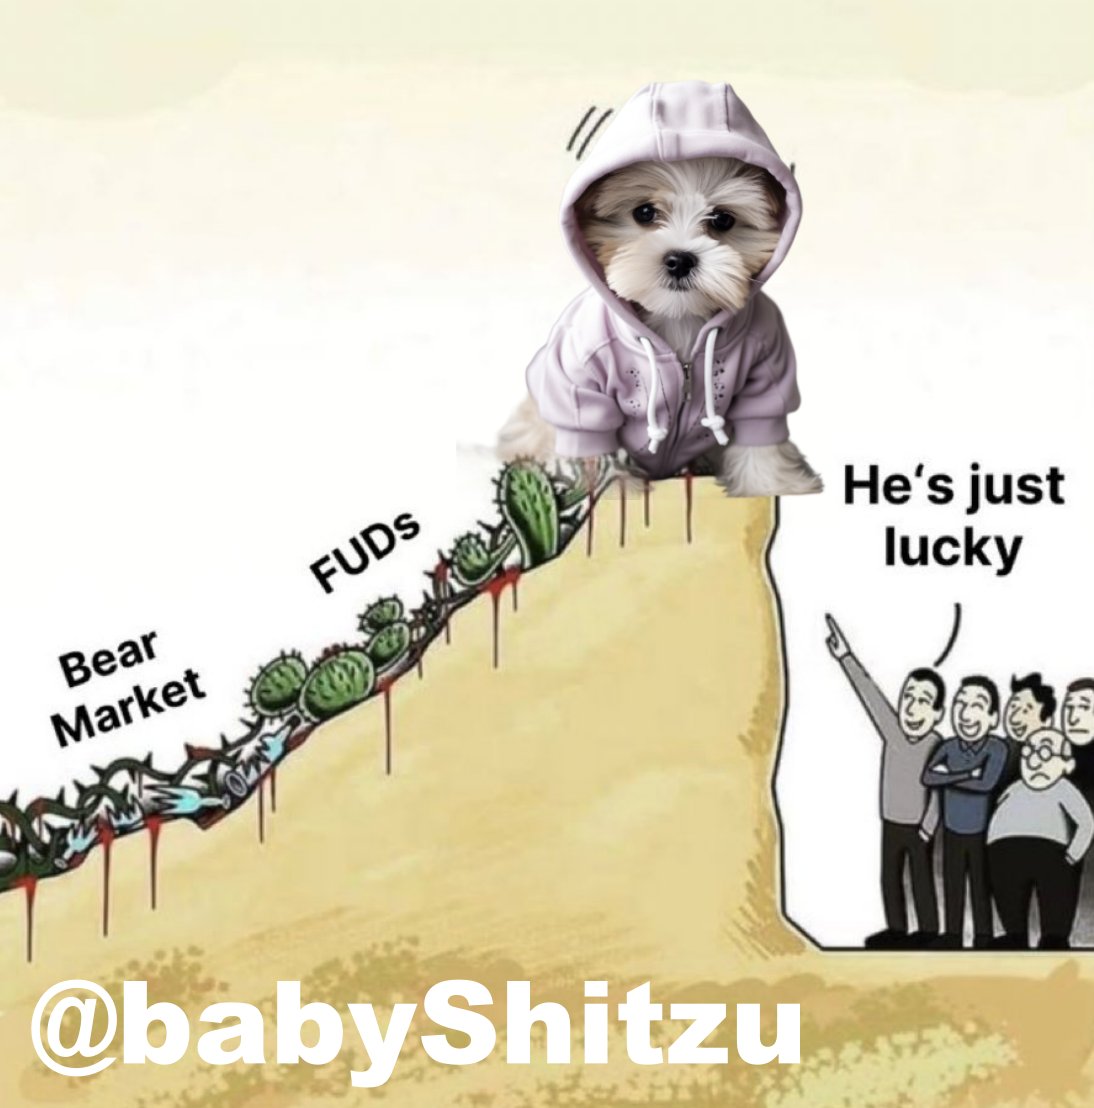 🐾 Sometimes the climb is ruff, but BabyShitzu keeps pushing through! 🐶💪 From bear markets to FUDs, nothing can stop us! 🚀 People may call it luck, but we call it pawsome dedication! 🌟 Keep hustling, Shitzu fam! 🐾 #BabyShitzu #CryptoCommunity #NeverGiveUp #Cardano